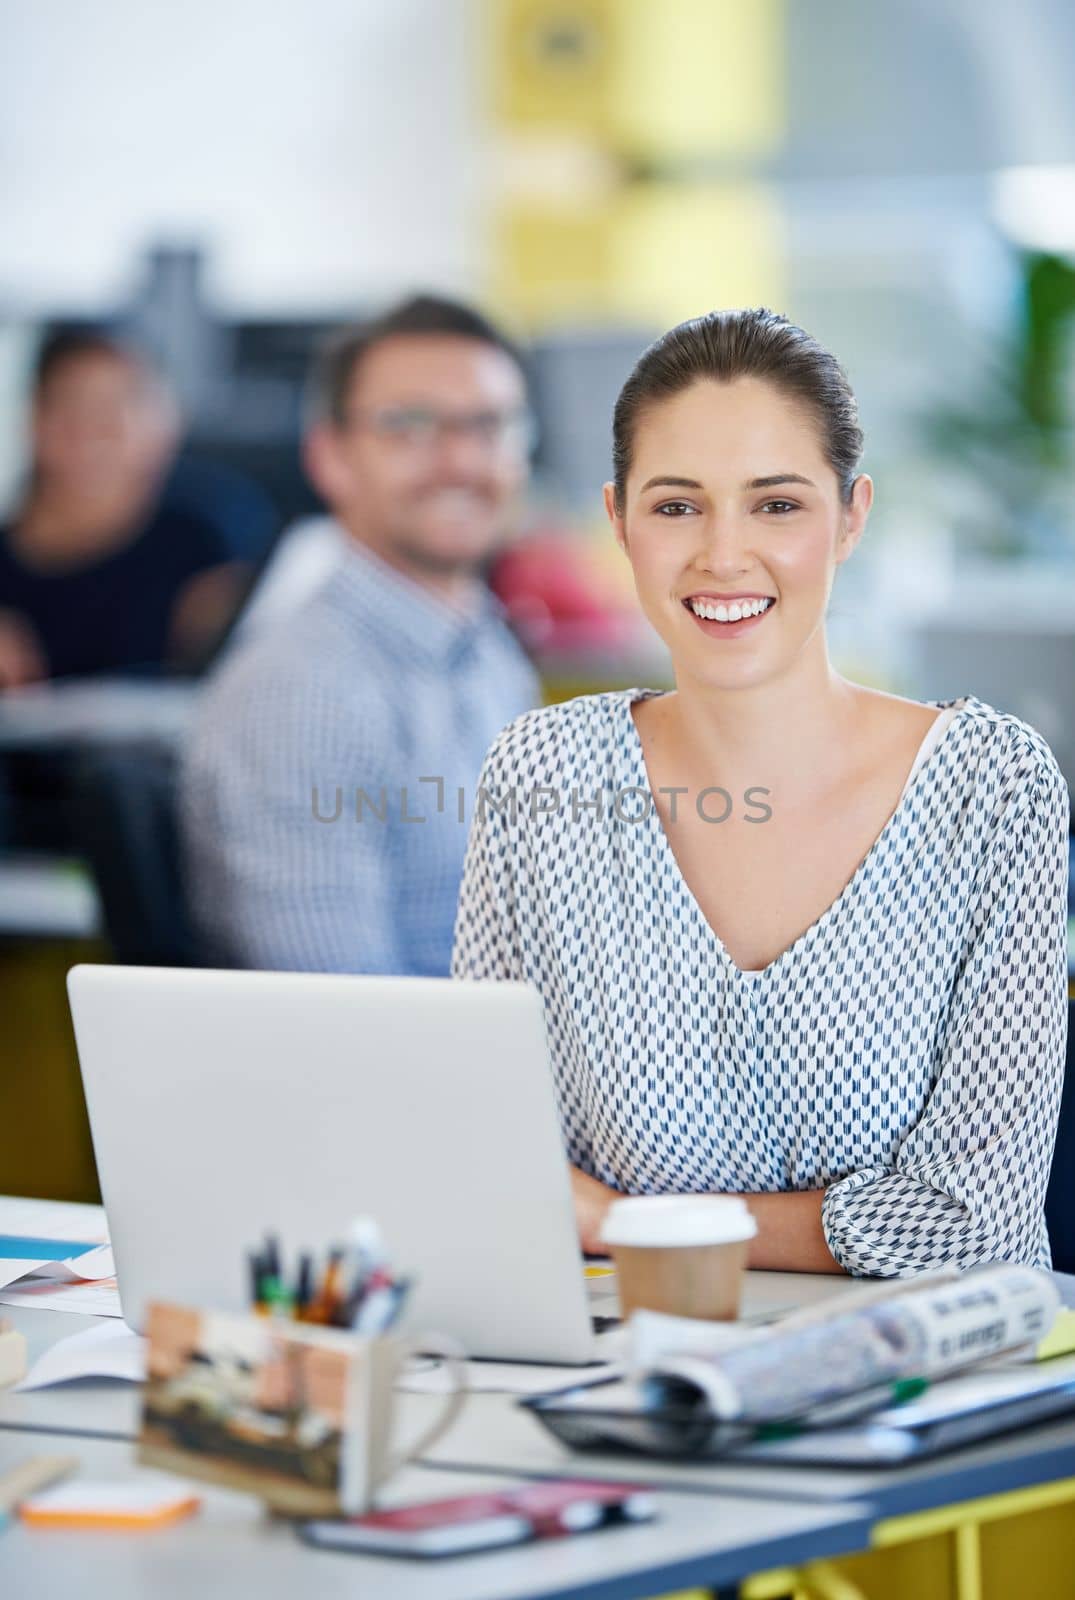 Follow your career dreams. Portrait of a designer sitting at her desk working on a laptop with colleagues in the background